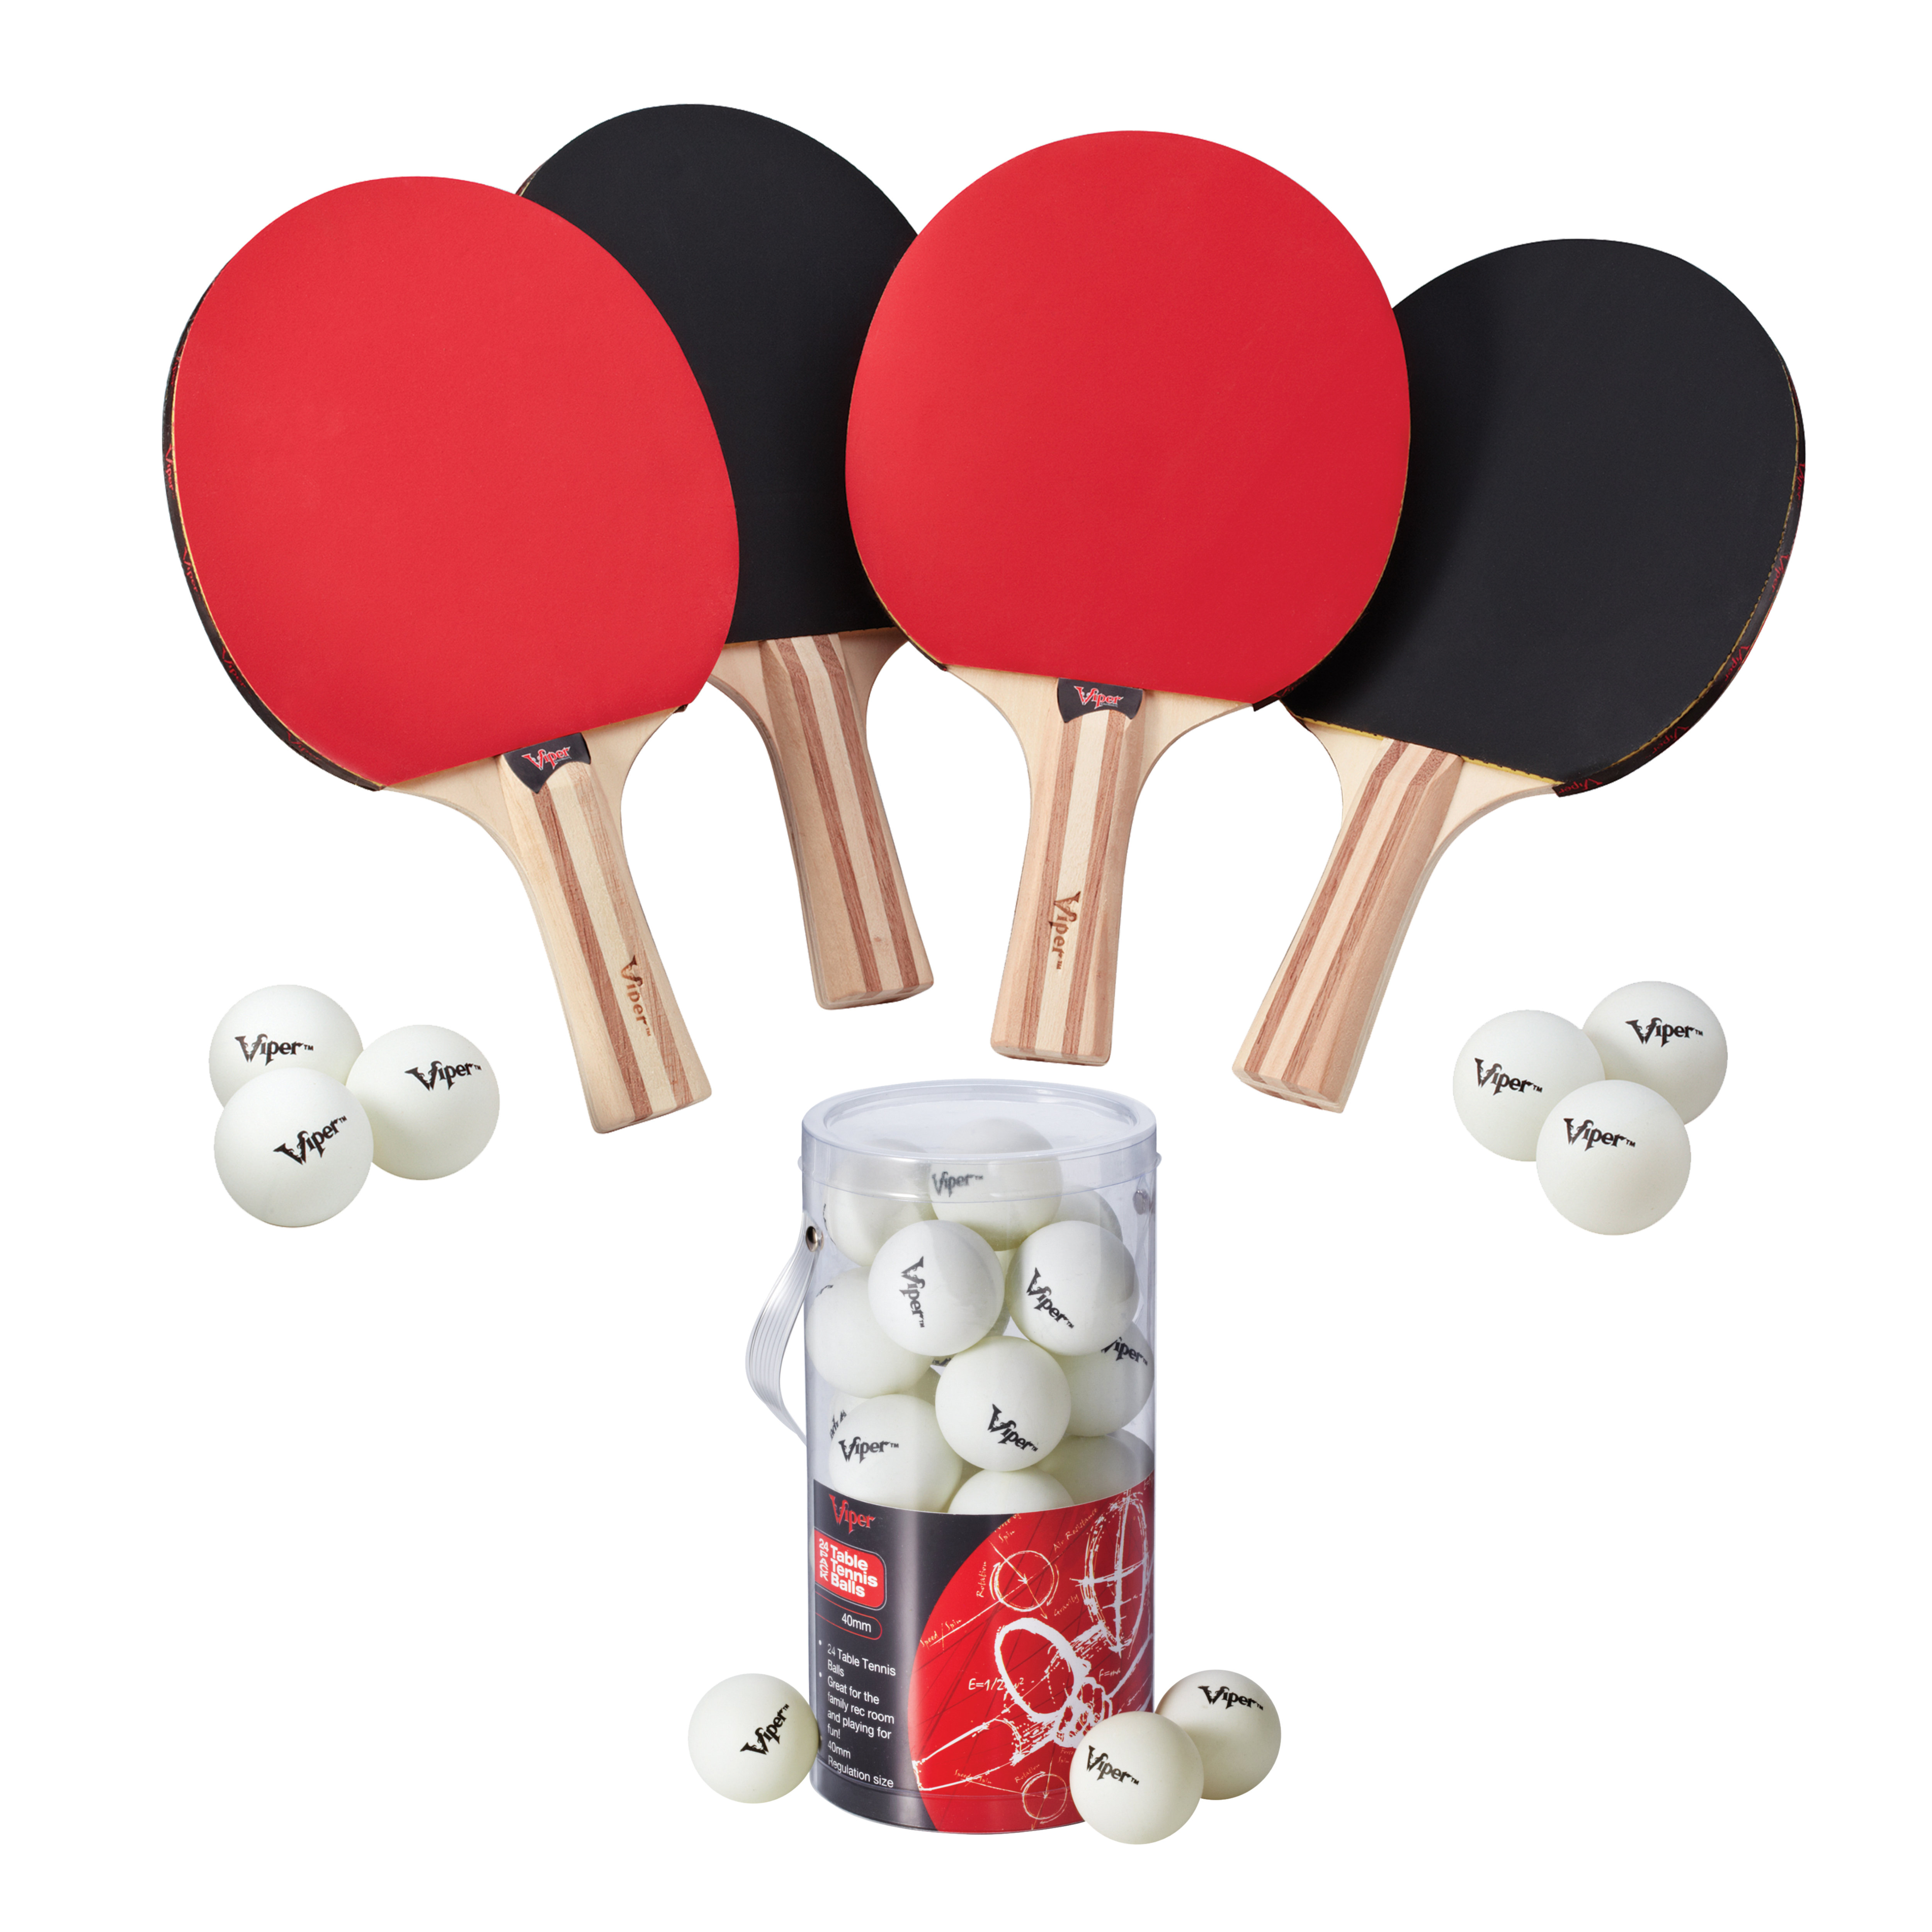 Free Shipping Rackets/Paddles and Balls Viper Table Tennis Accessory Set 